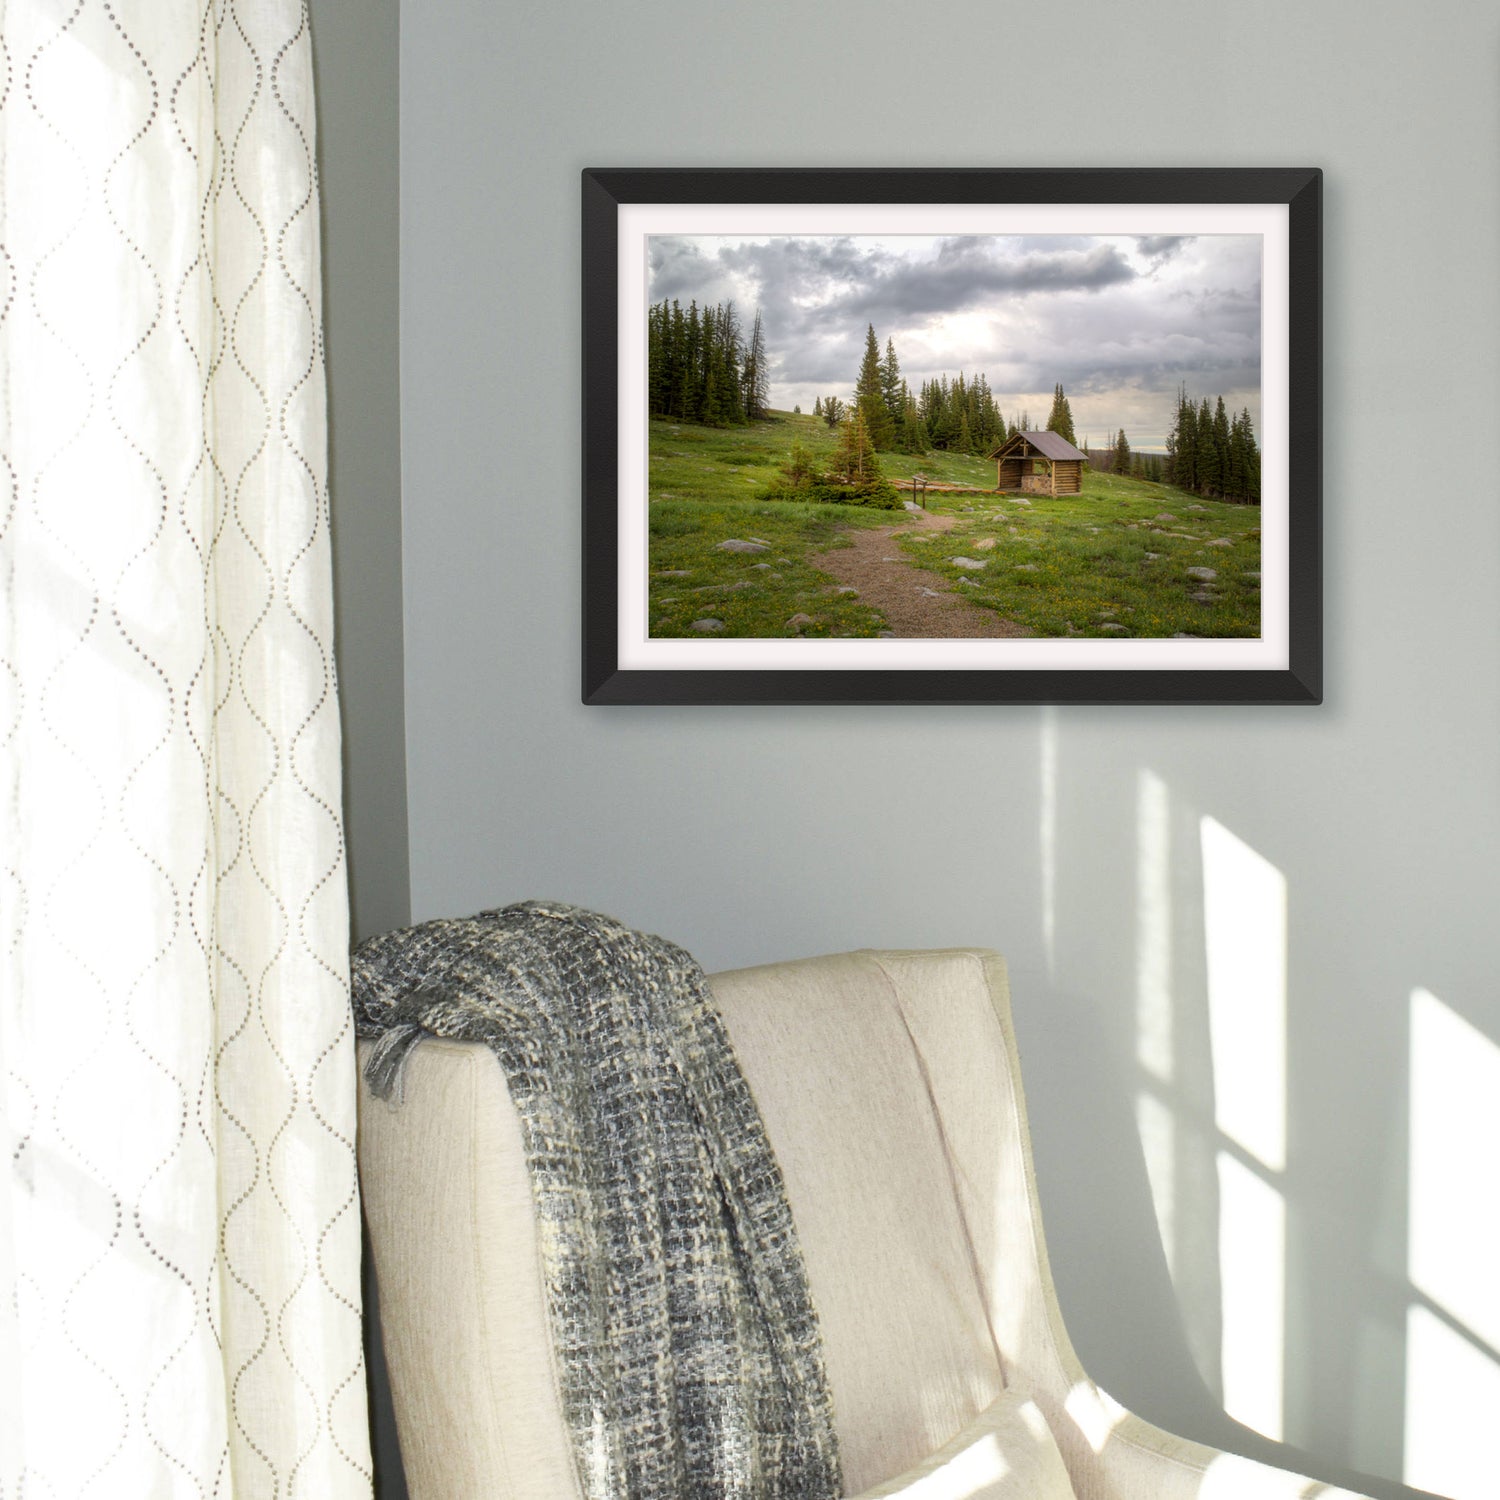 St Albans Chapel photography print from the Snowy Range in Wyoming